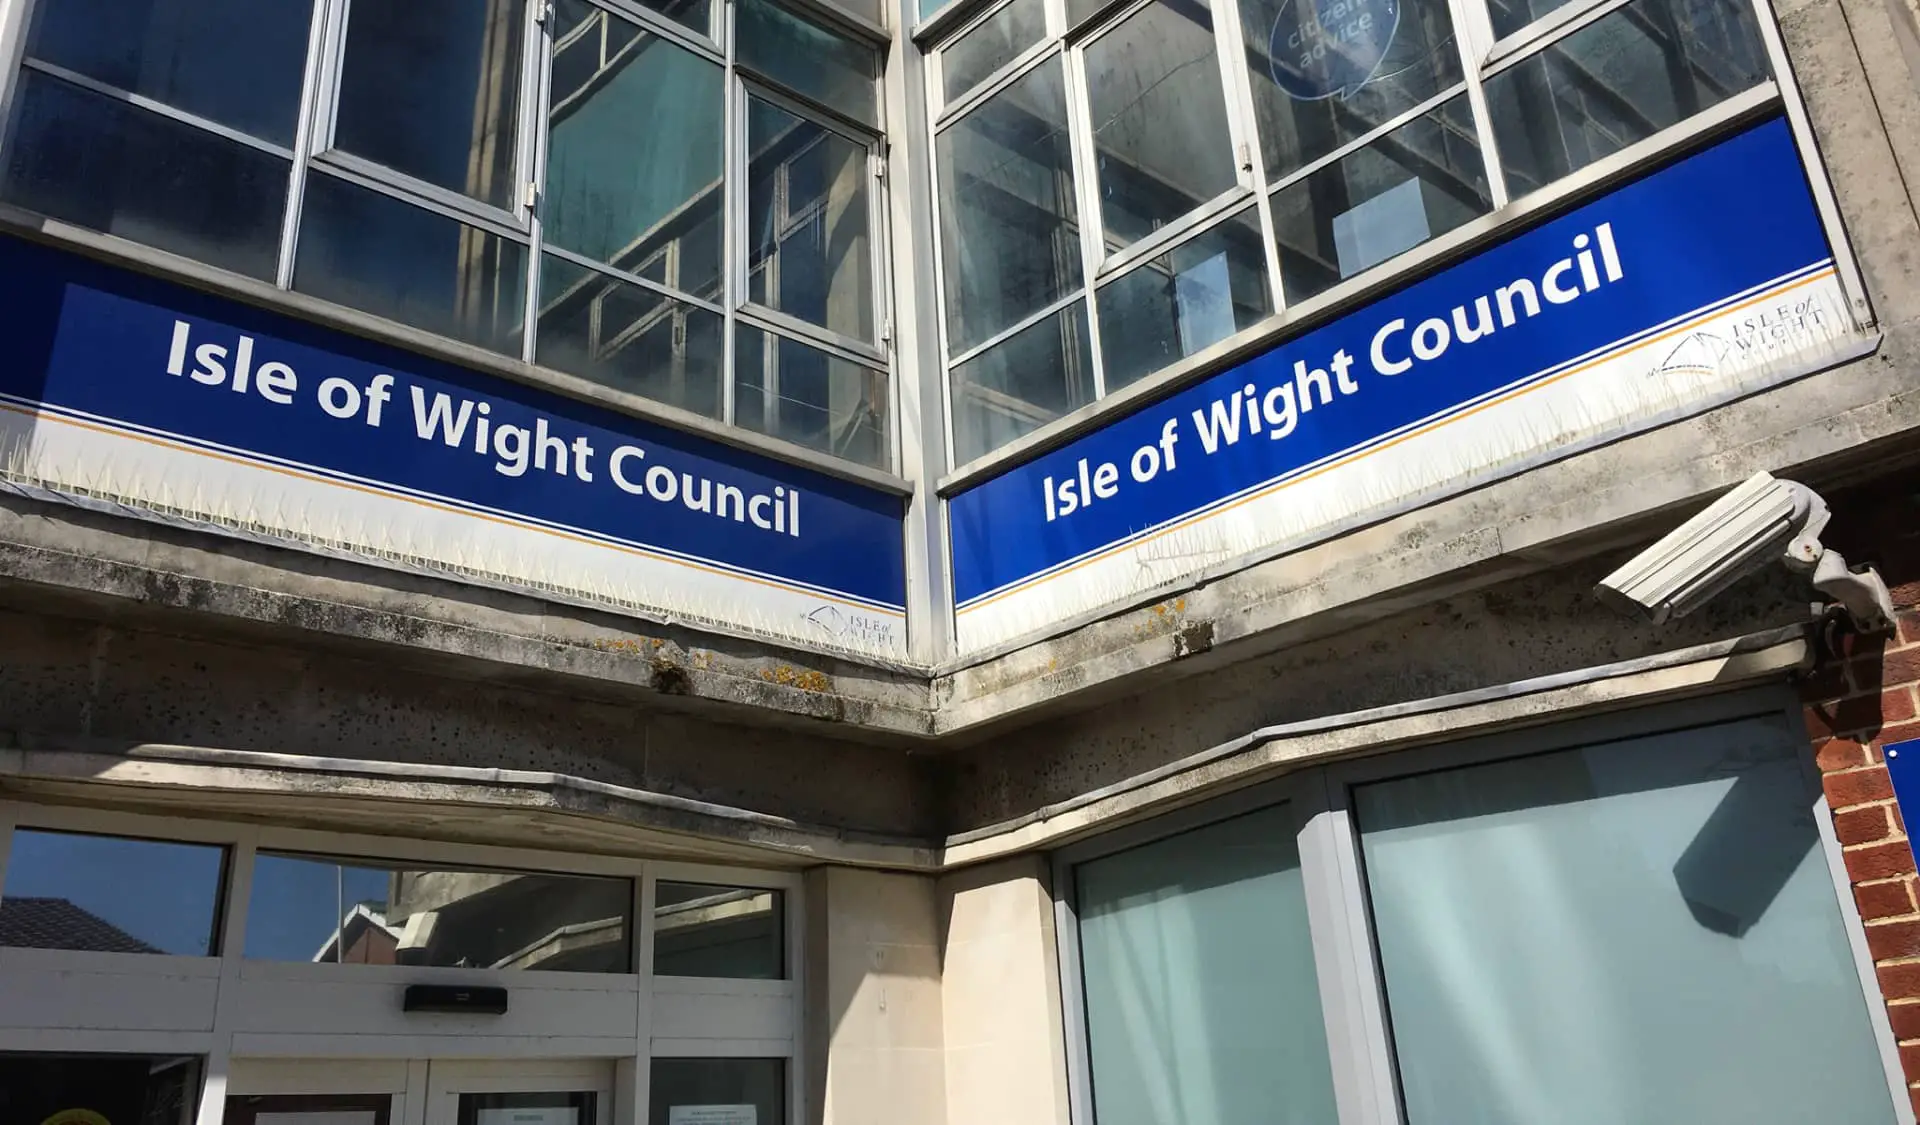 County Hall - isle of wight council front door